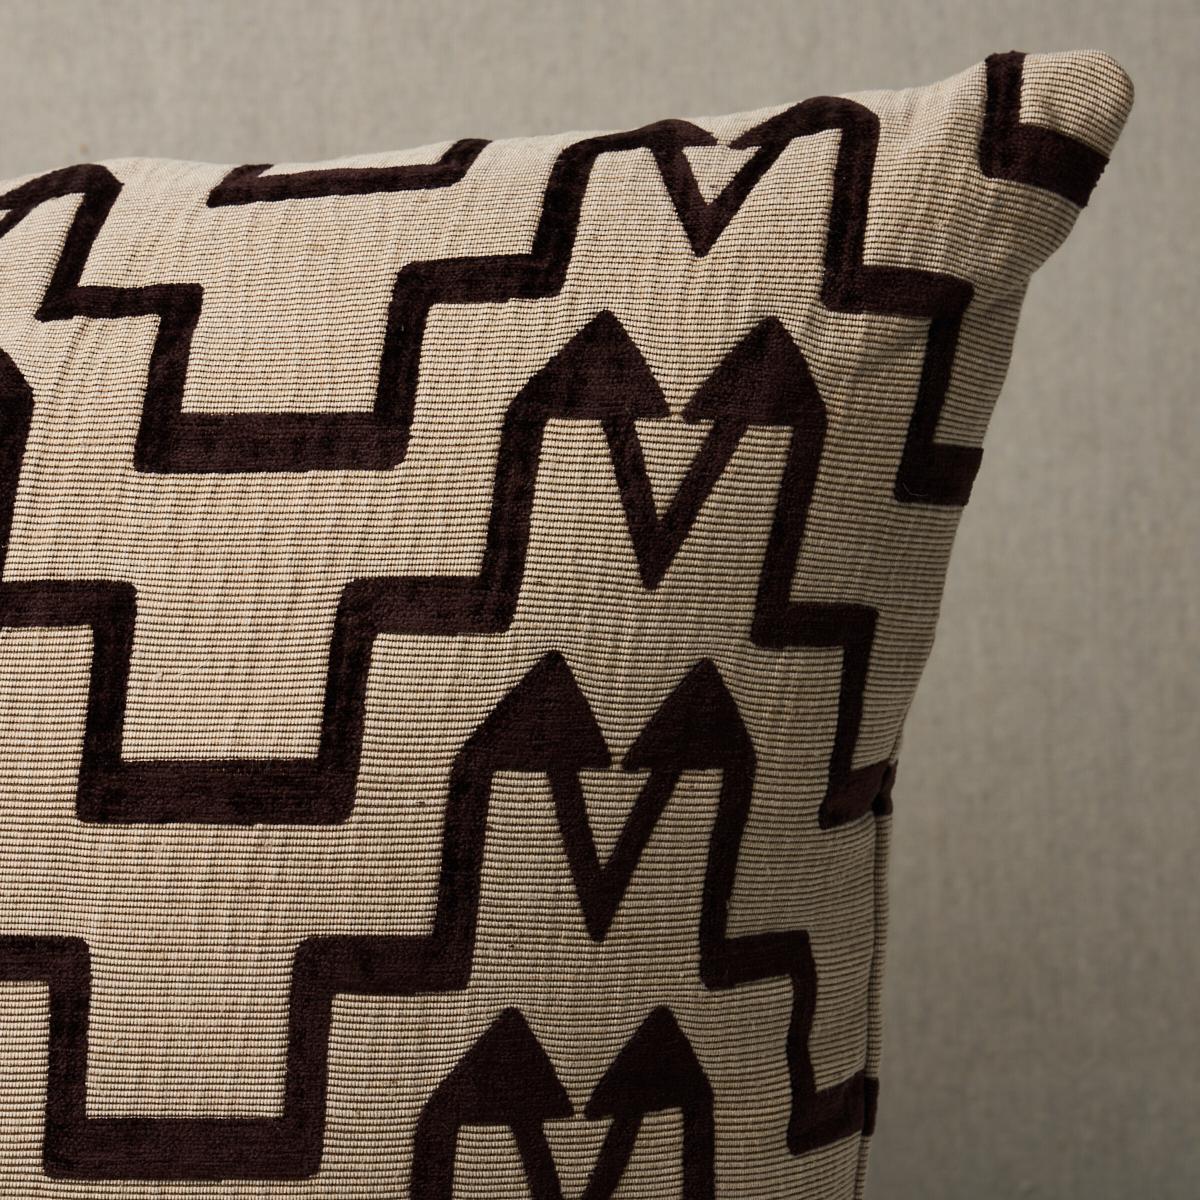 This pillow features Turkish Step by David Kaihoi for Schumacher with a knife edge finish. Designed by David Kaihoi, Turkish Step in brown is a handsome, low-pile chenille fabric that feels wonderfully modern and ethnic all at once. Pillow includes